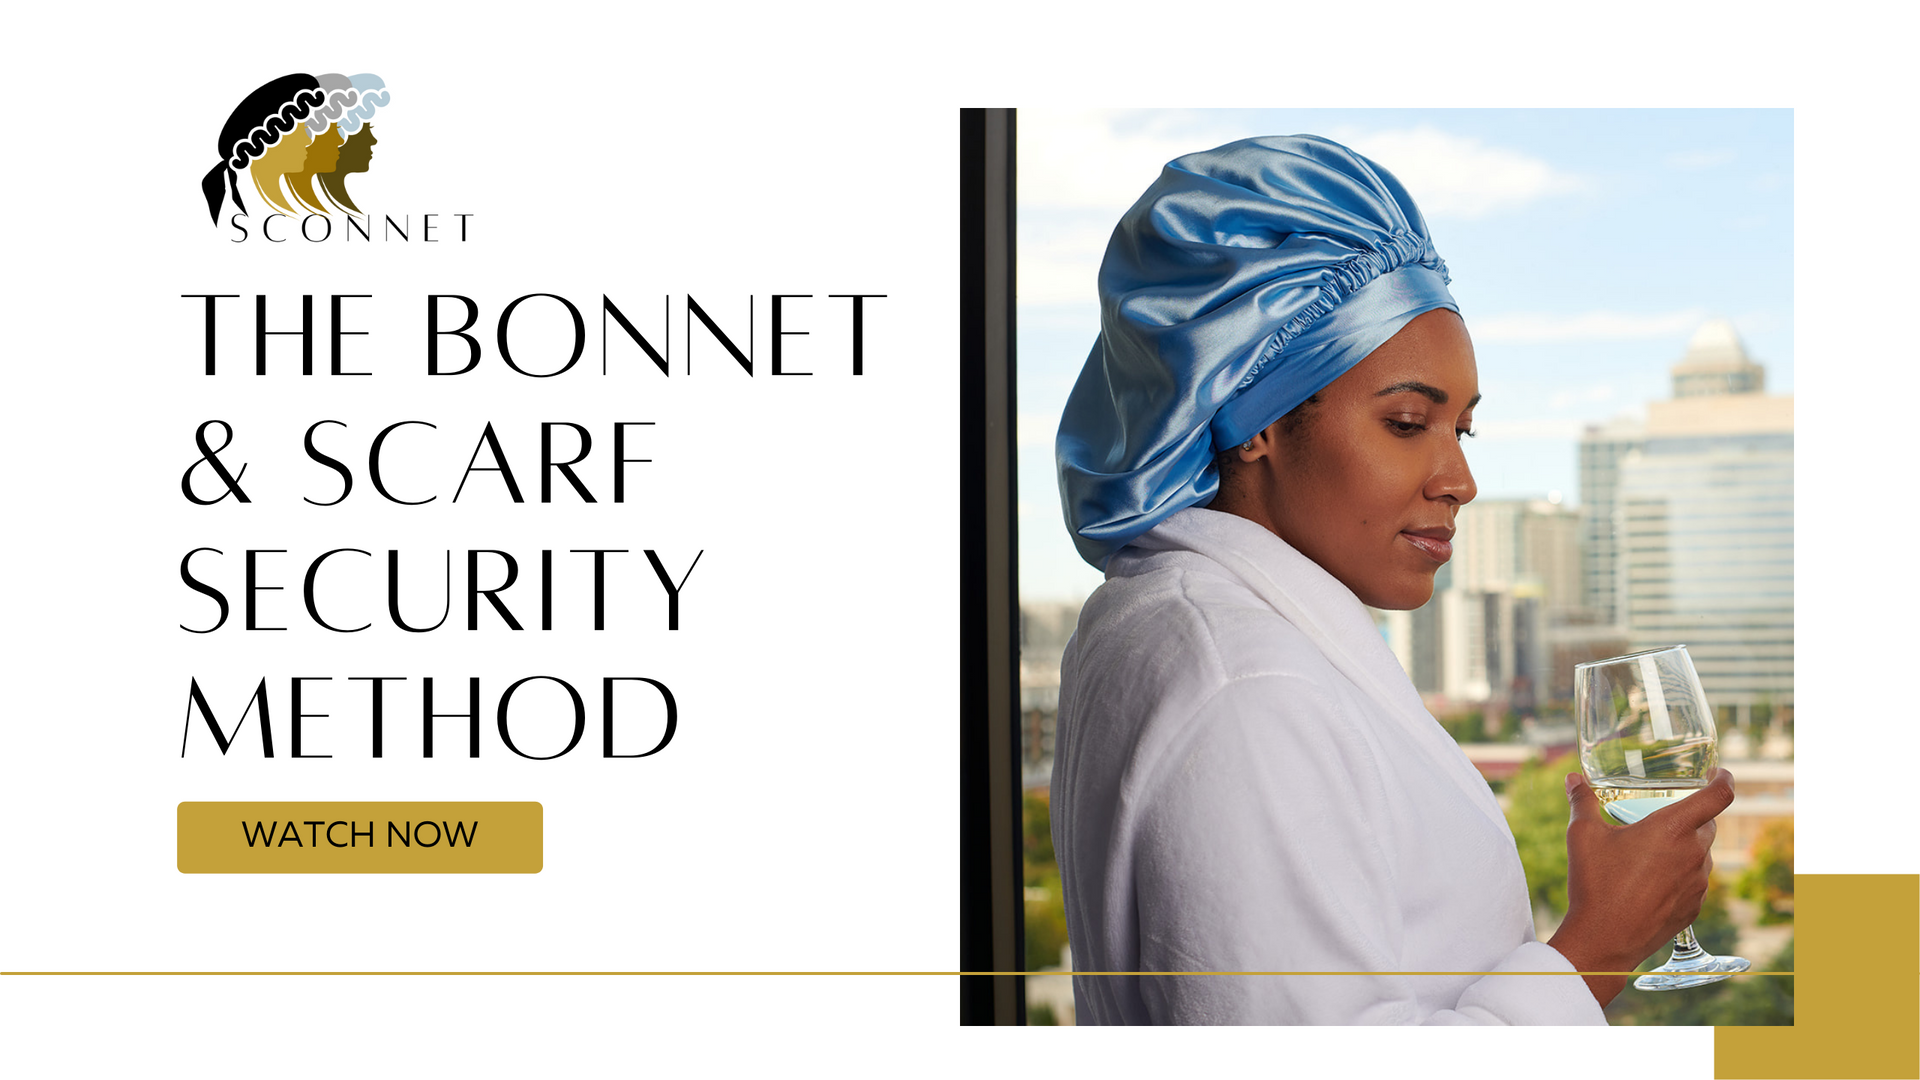 Load video: For those of you who like to wear a bonnet to protect your hairstyles and would like a little extra security, you can put the bonnet over your head and secure the bonnet with the scarf attachment.